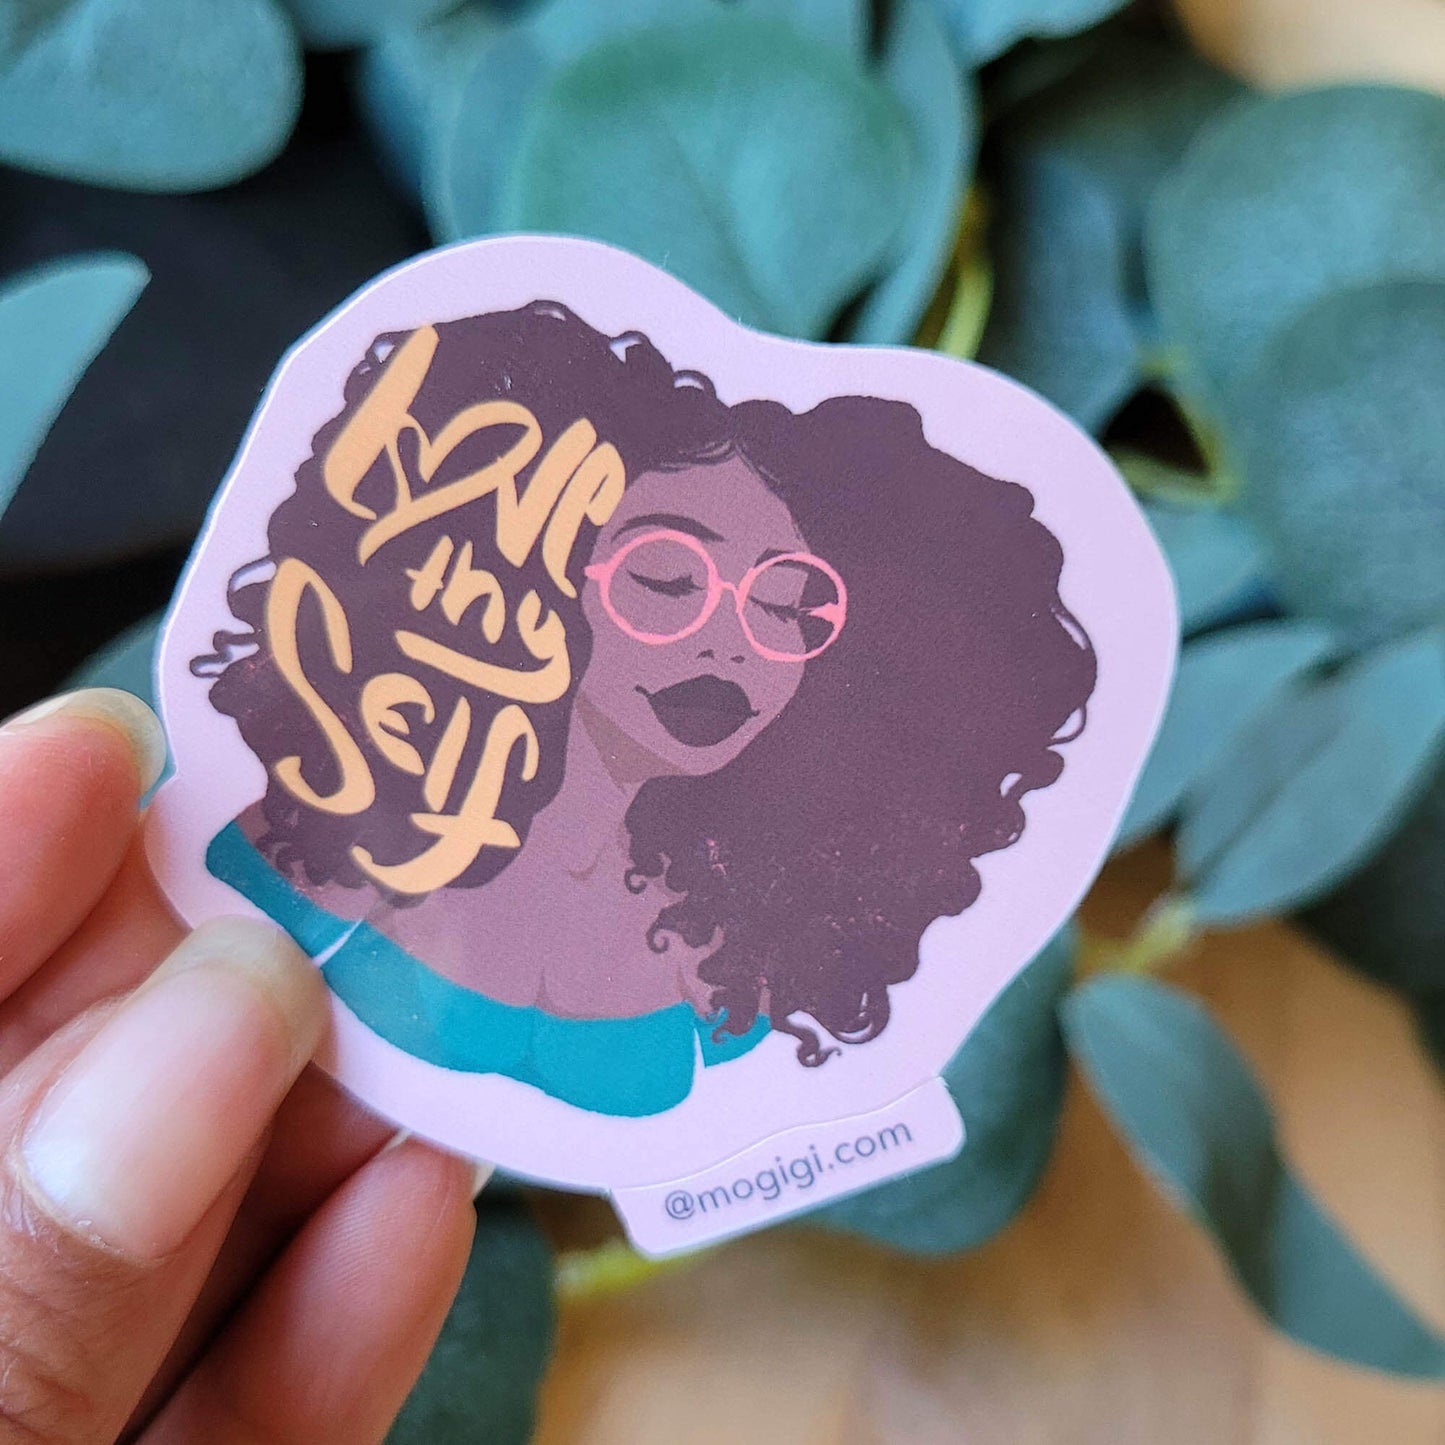 empowering inspirational black woman love thy self die-cut viynl sticker. MoGigi™ add some motivational touches to your phone case, laptop, journal.